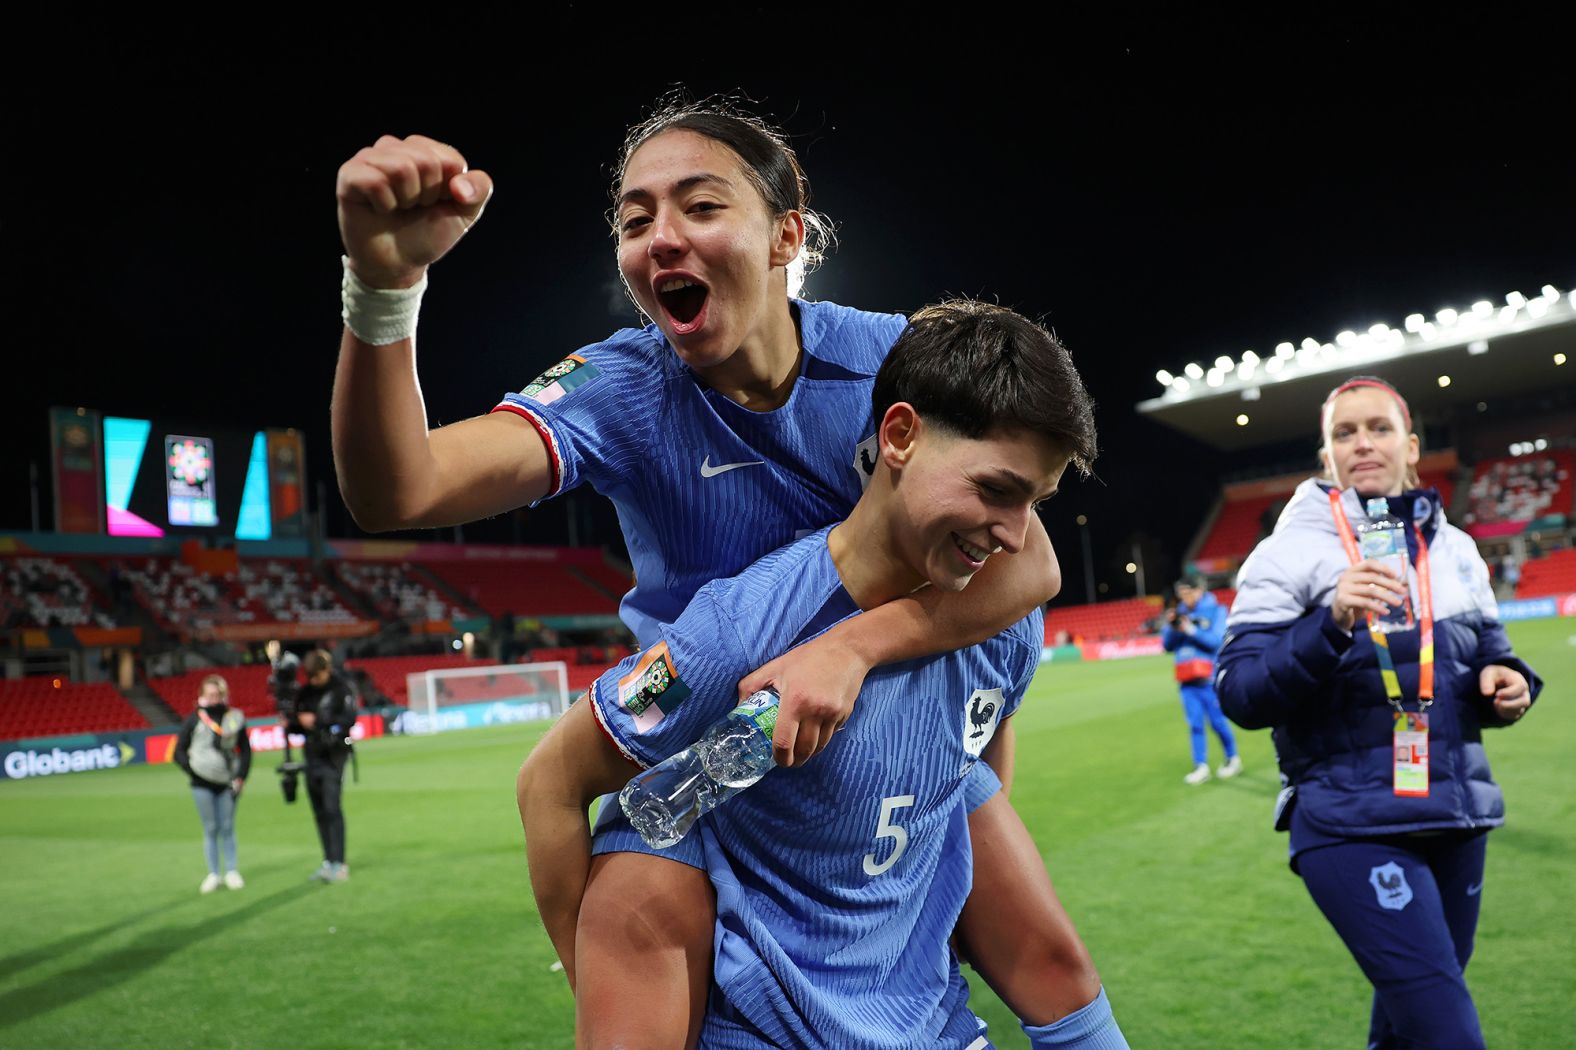 France's Selma Bacha, left, and Élisa De Almeida celebrate after a<a href="index.php?page=&url=https%3A%2F%2Fcnn.com%2F2023%2F08%2F07%2Ffootball%2Fcolombia-jamaica-france-morocco-womens-world-cup-spt-intl%2Findex.html" target="_blank"> 4-0 victory against Morocco</a> in the round of 16.